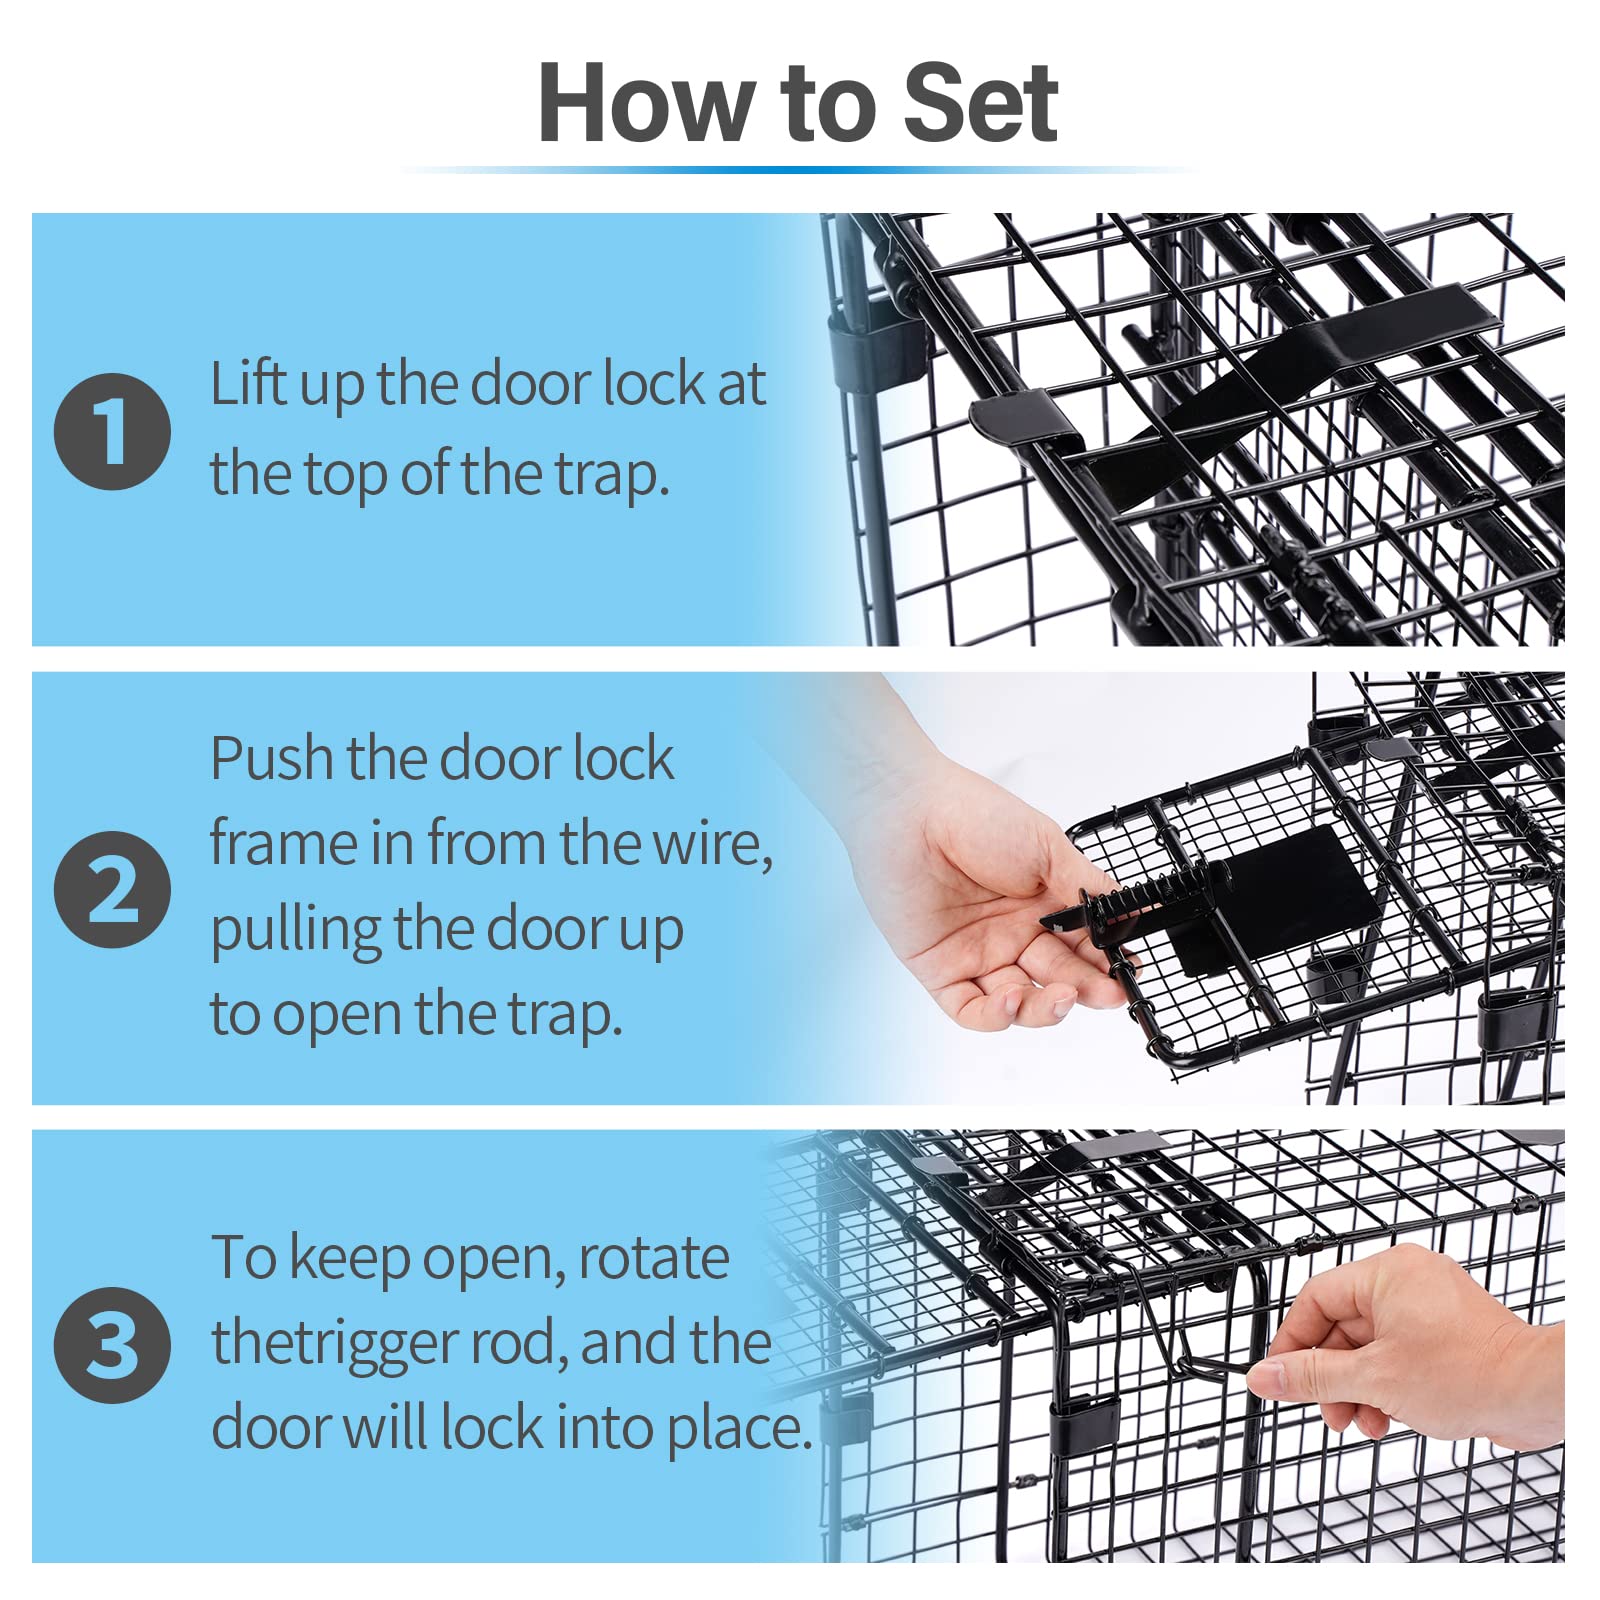 Humane Way Folding 32 Inch Live Humane Animal Trap - Safe Traps for All Animals - Raccoons, Cats, Groundhogs, Opossums - 32